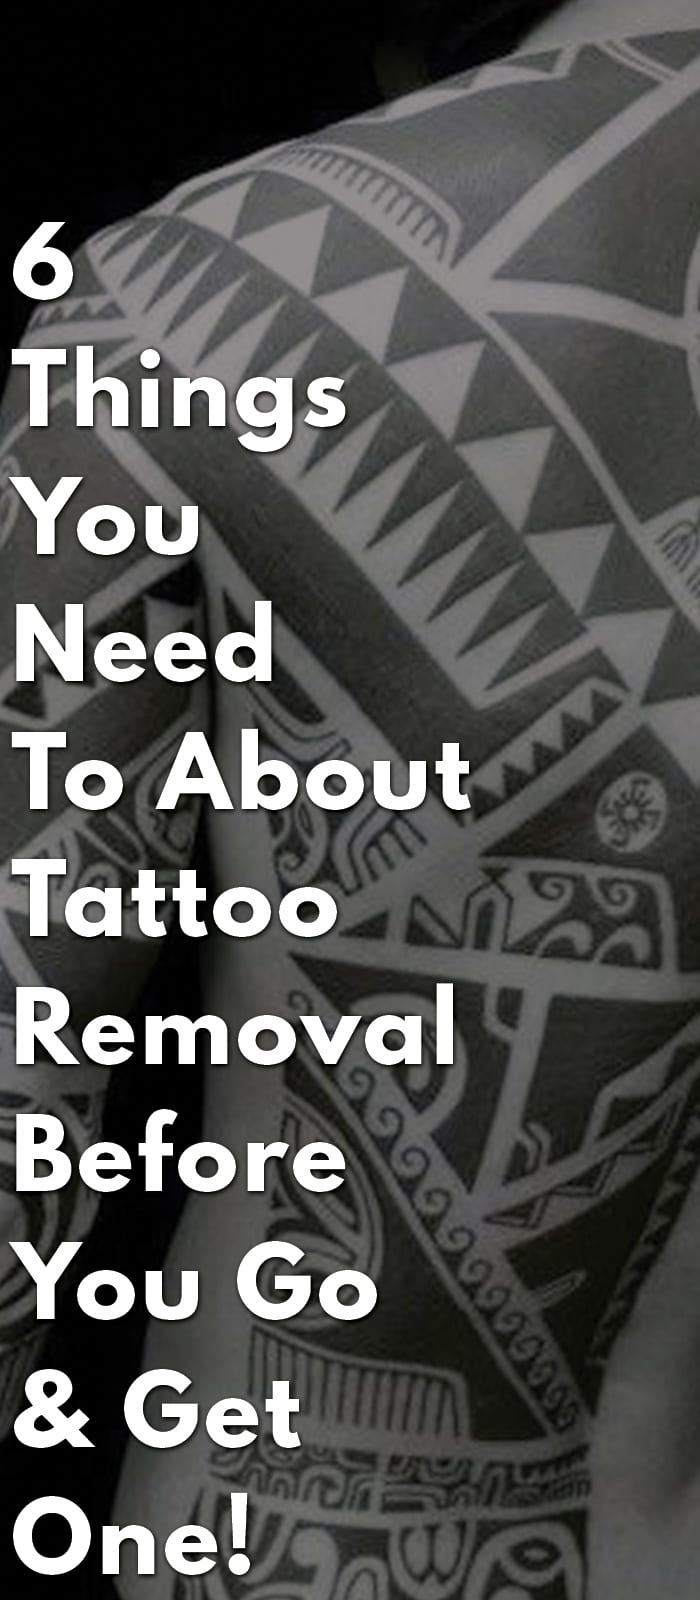 6-Things-You-Need-To-About-Tattoo-Removal-Before-You-Go-&-Get-One!